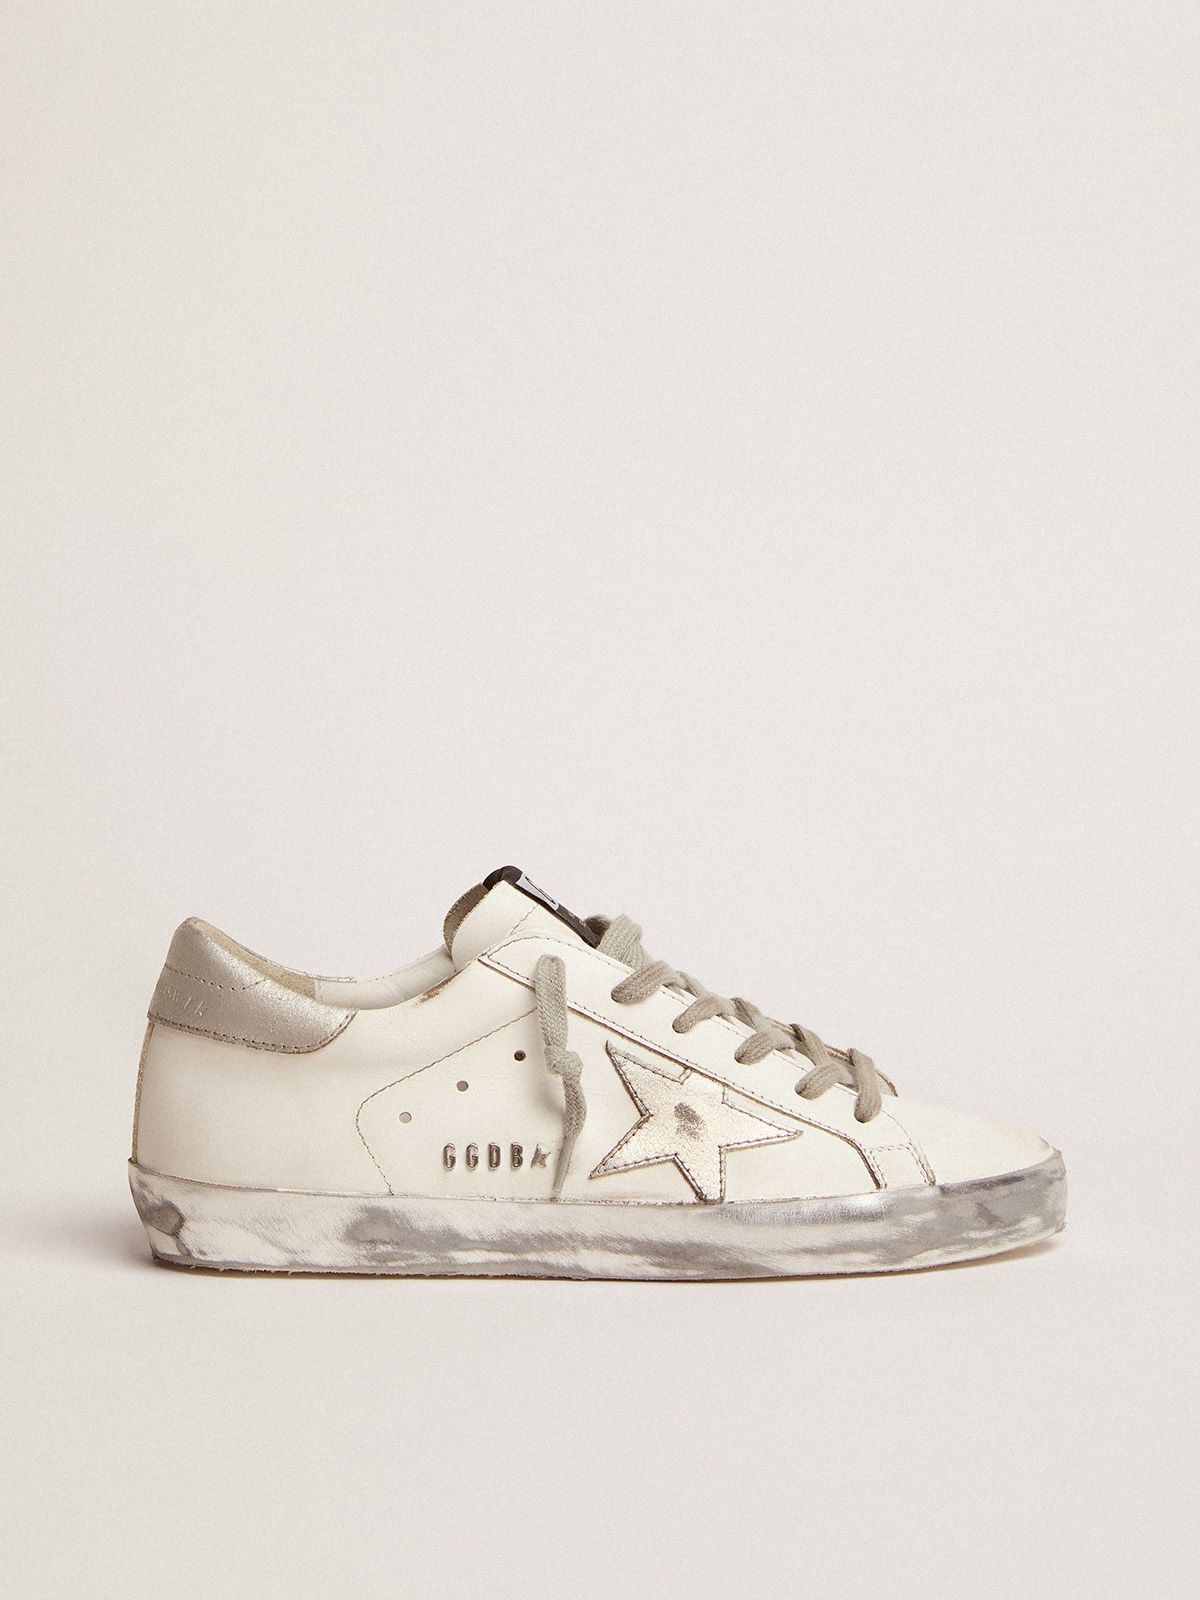 golden goose foxing Super-Star sneakers stud silver with and sparkle lettering metal